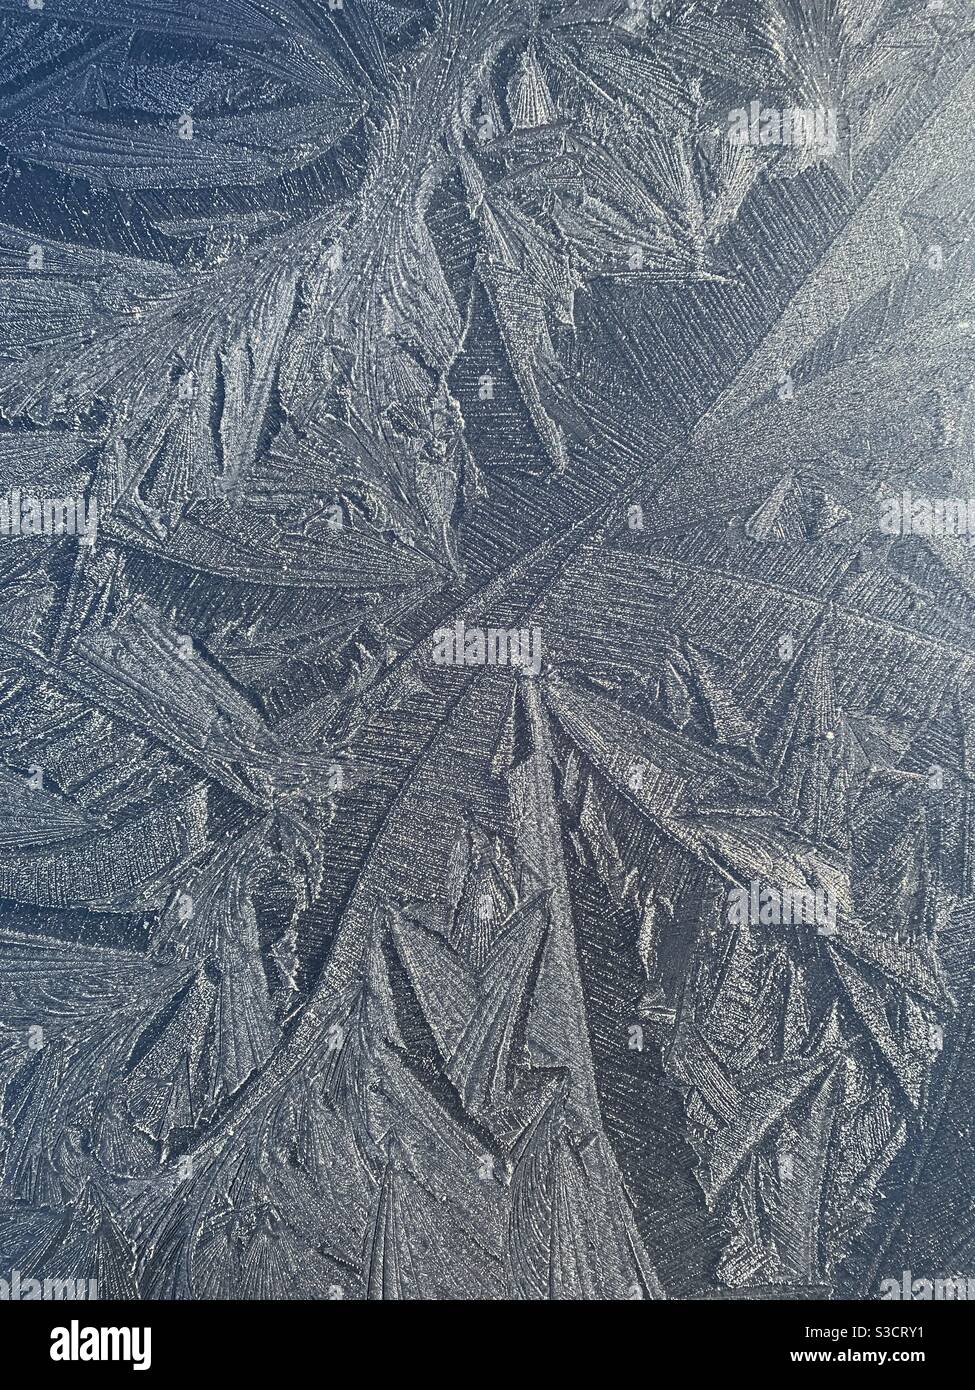 Abstract frost pattern on car bonnet Stock Photo